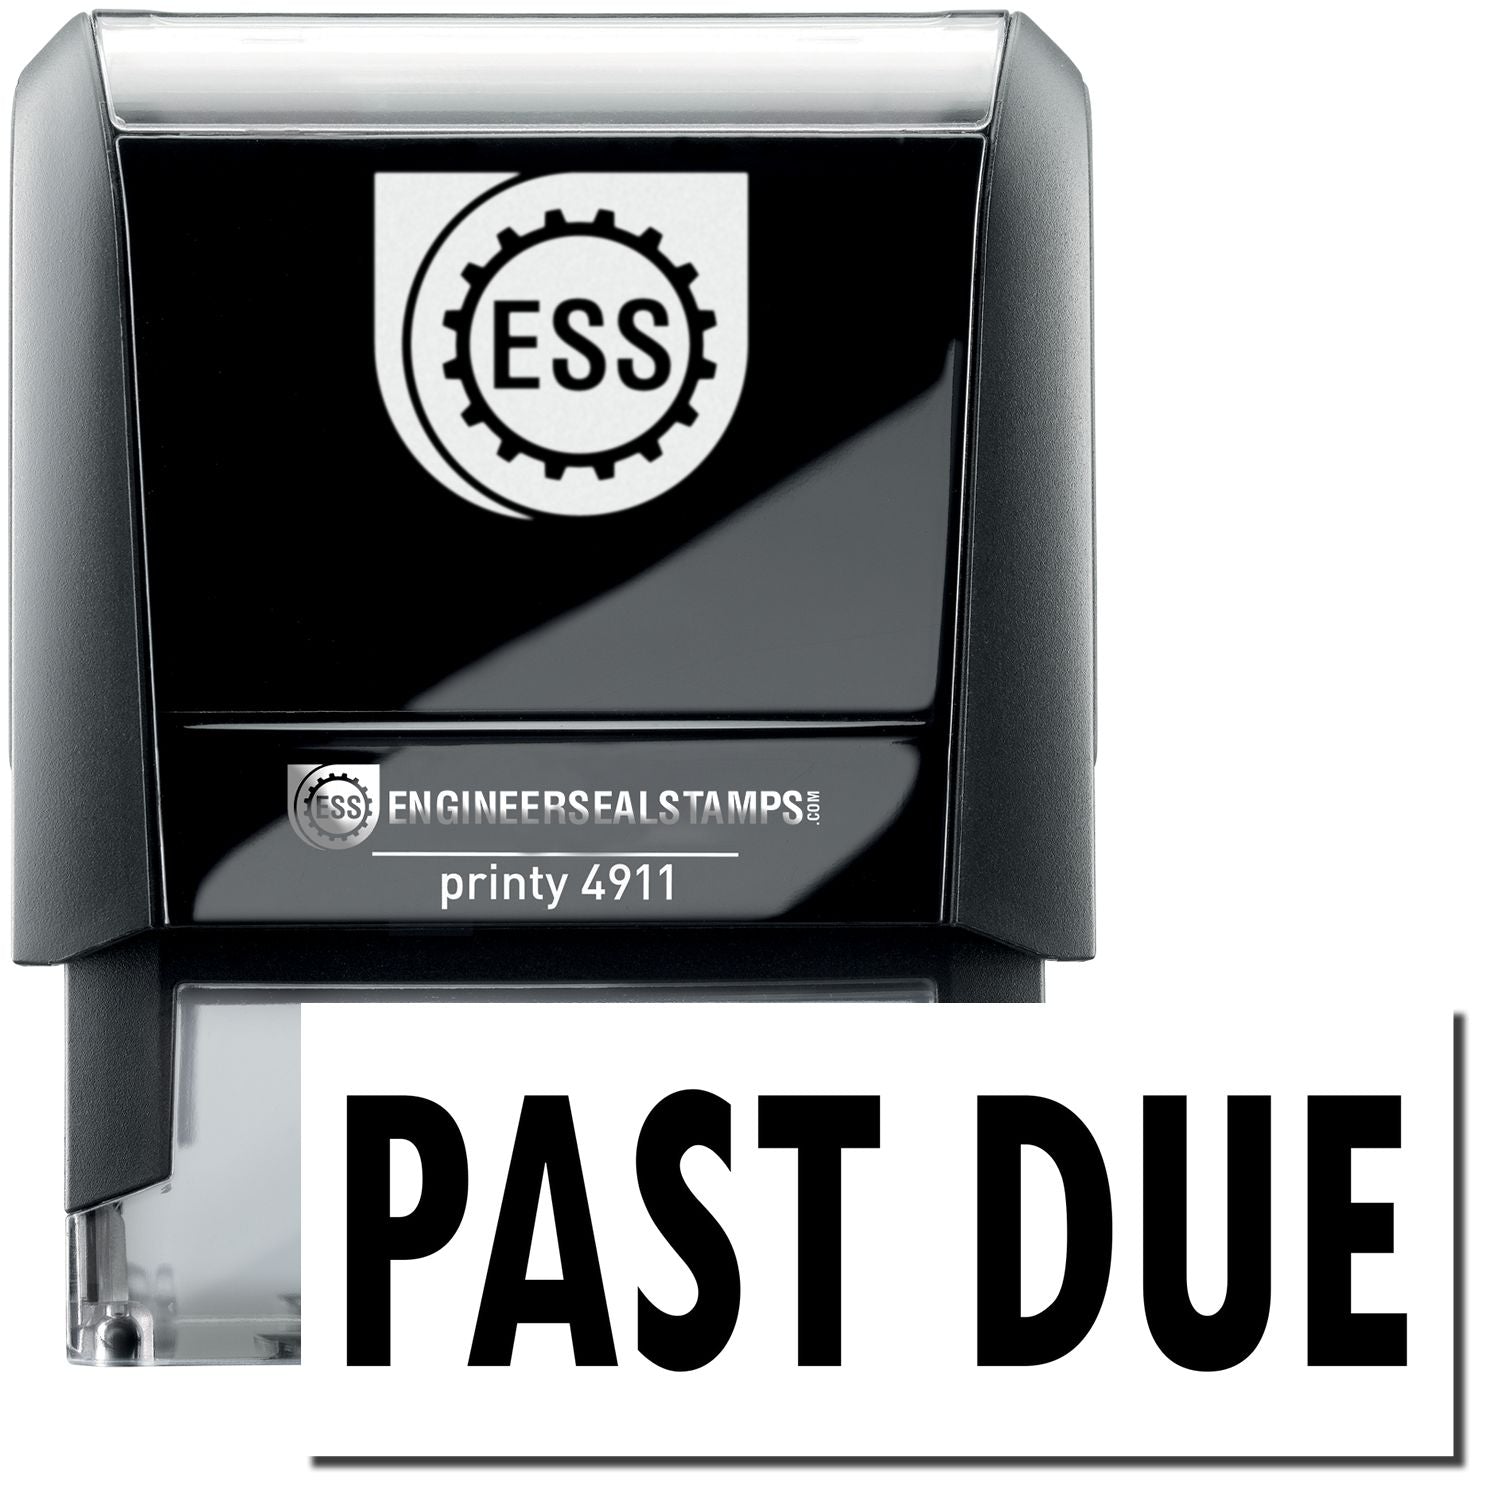 A self-inking stamp with a stamped image showing how the text "PAST DUE" is displayed after stamping.